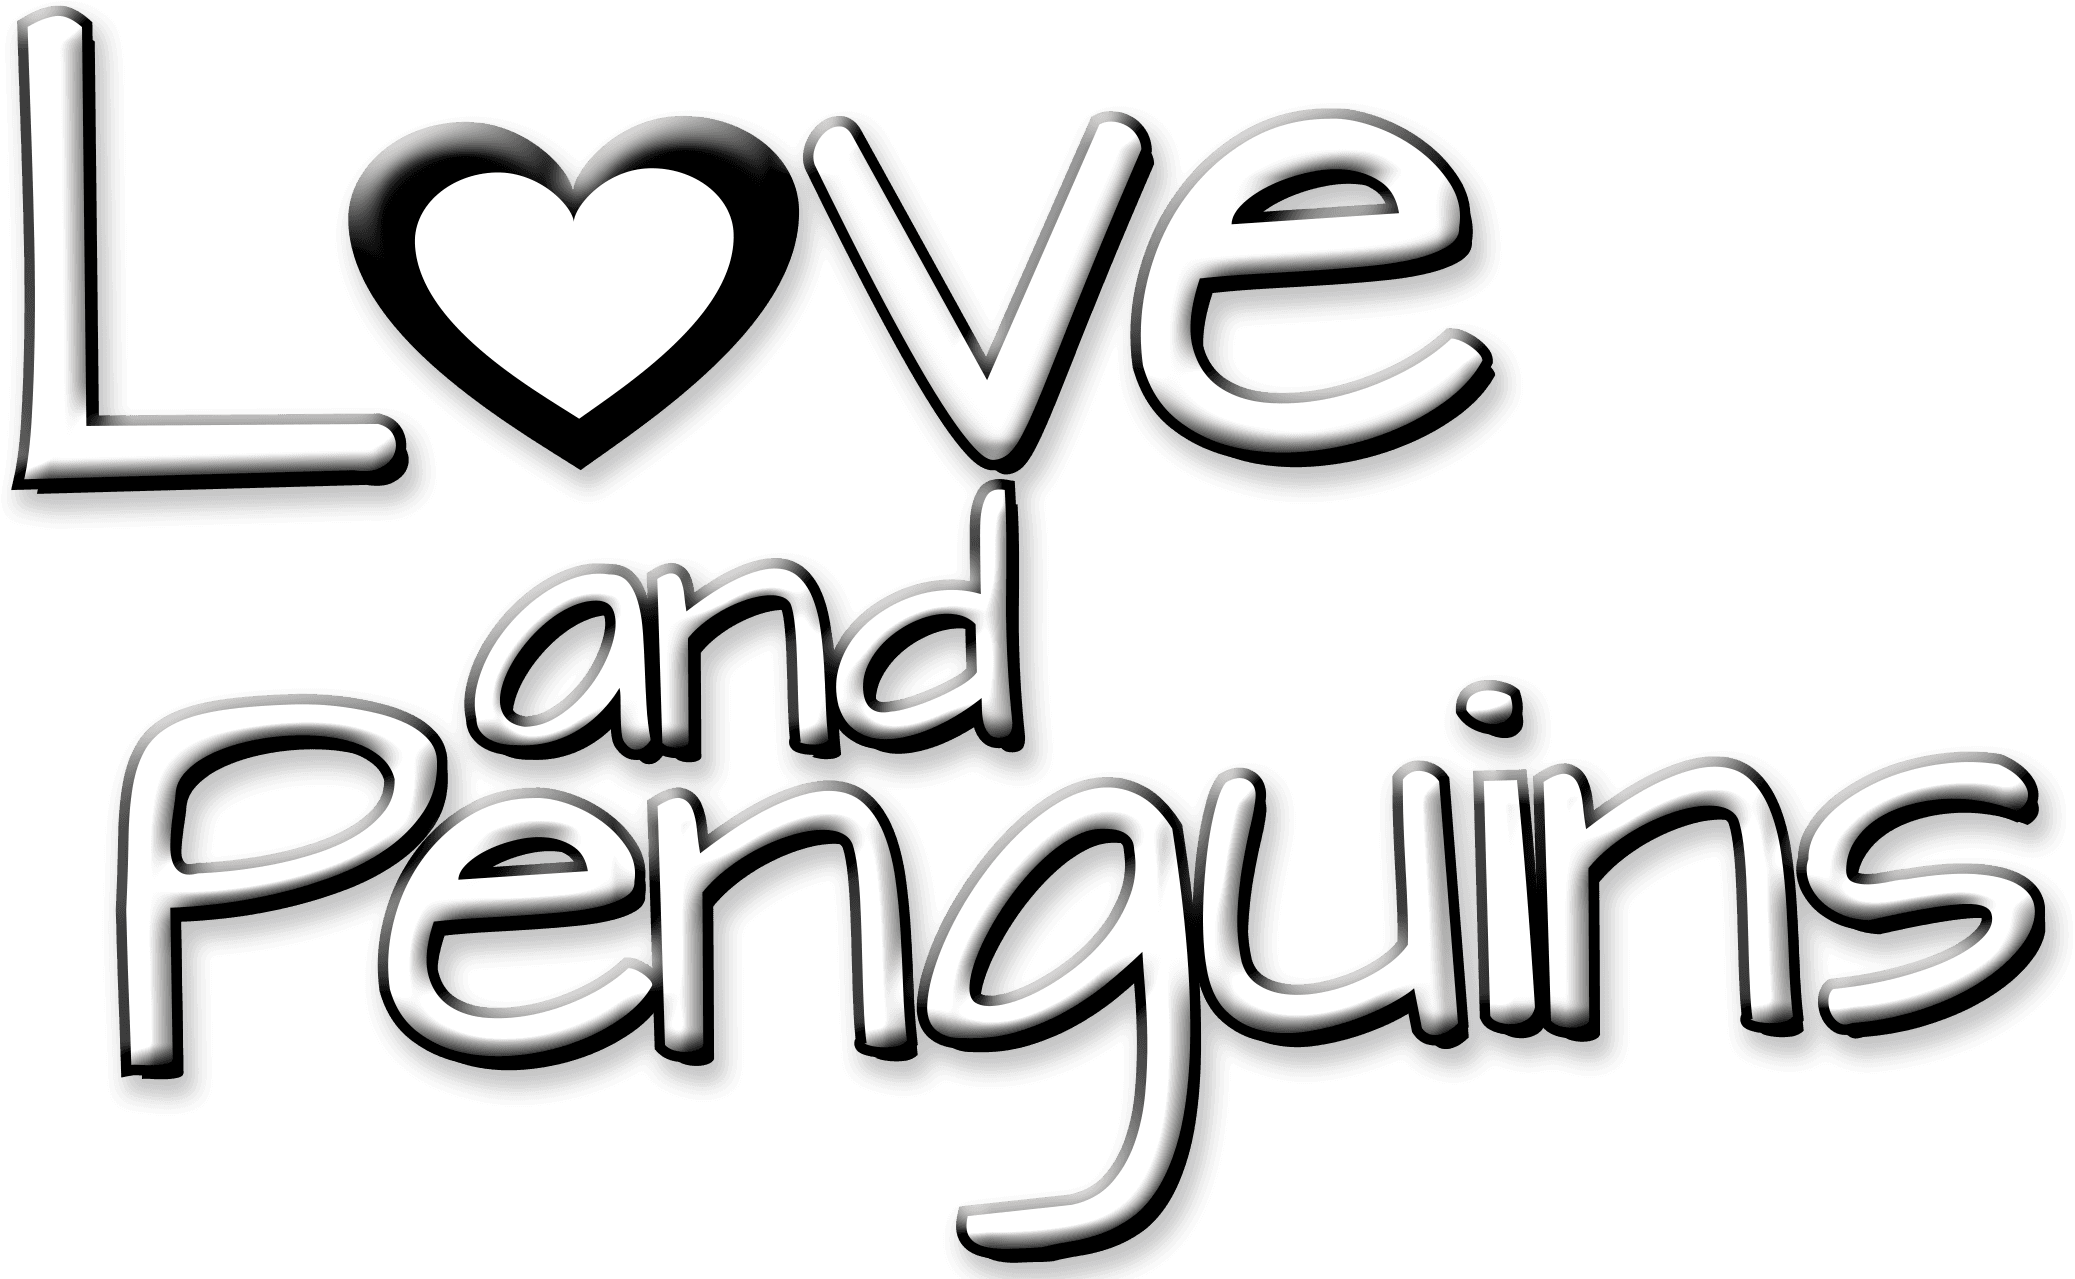 Love and Penguins logo